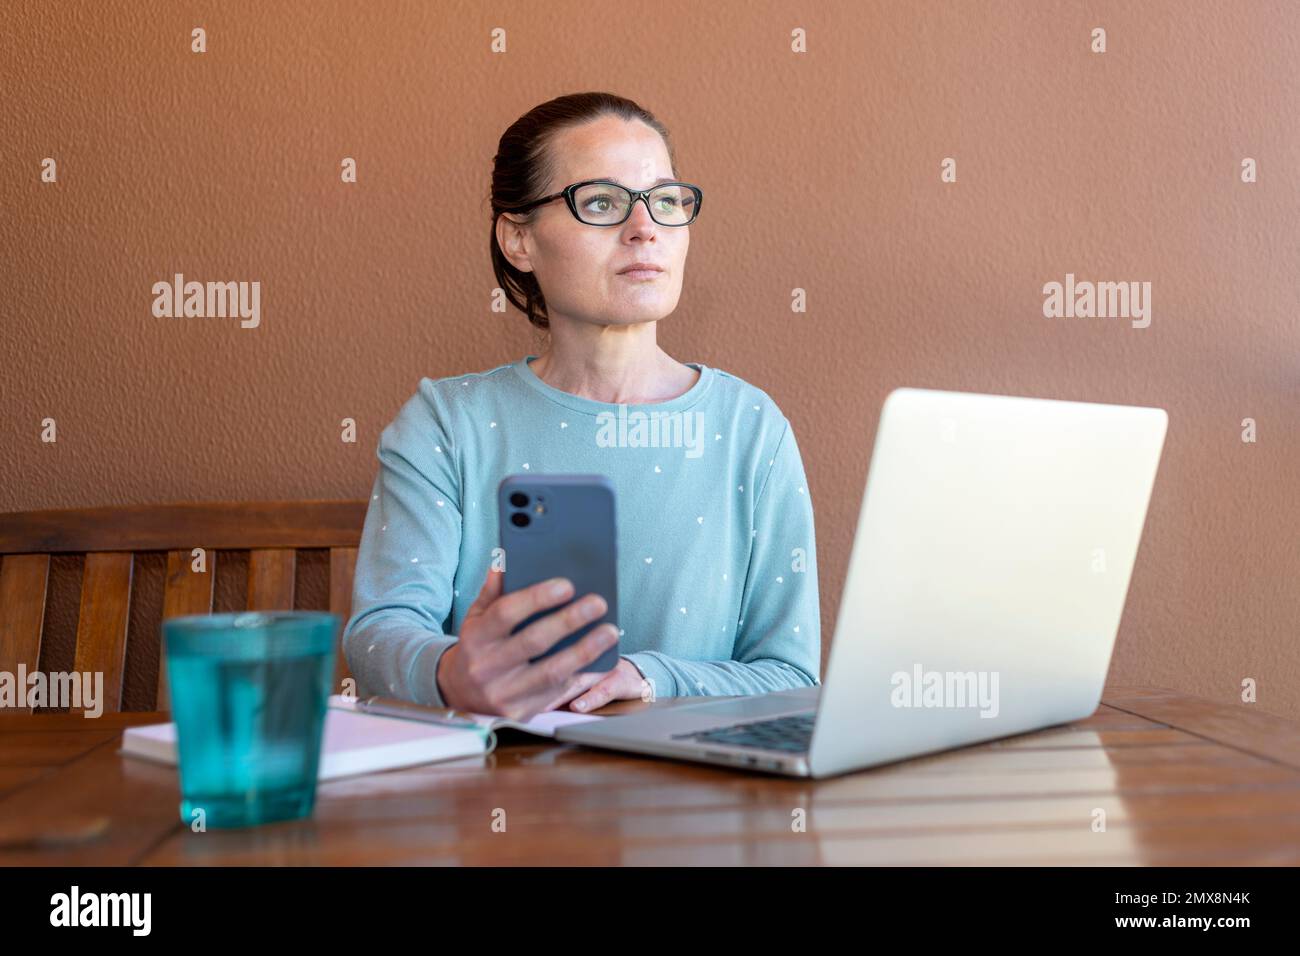 Woman sitting in her pyjamas working on her laptop and phone, looking away thinking. Stock Photo